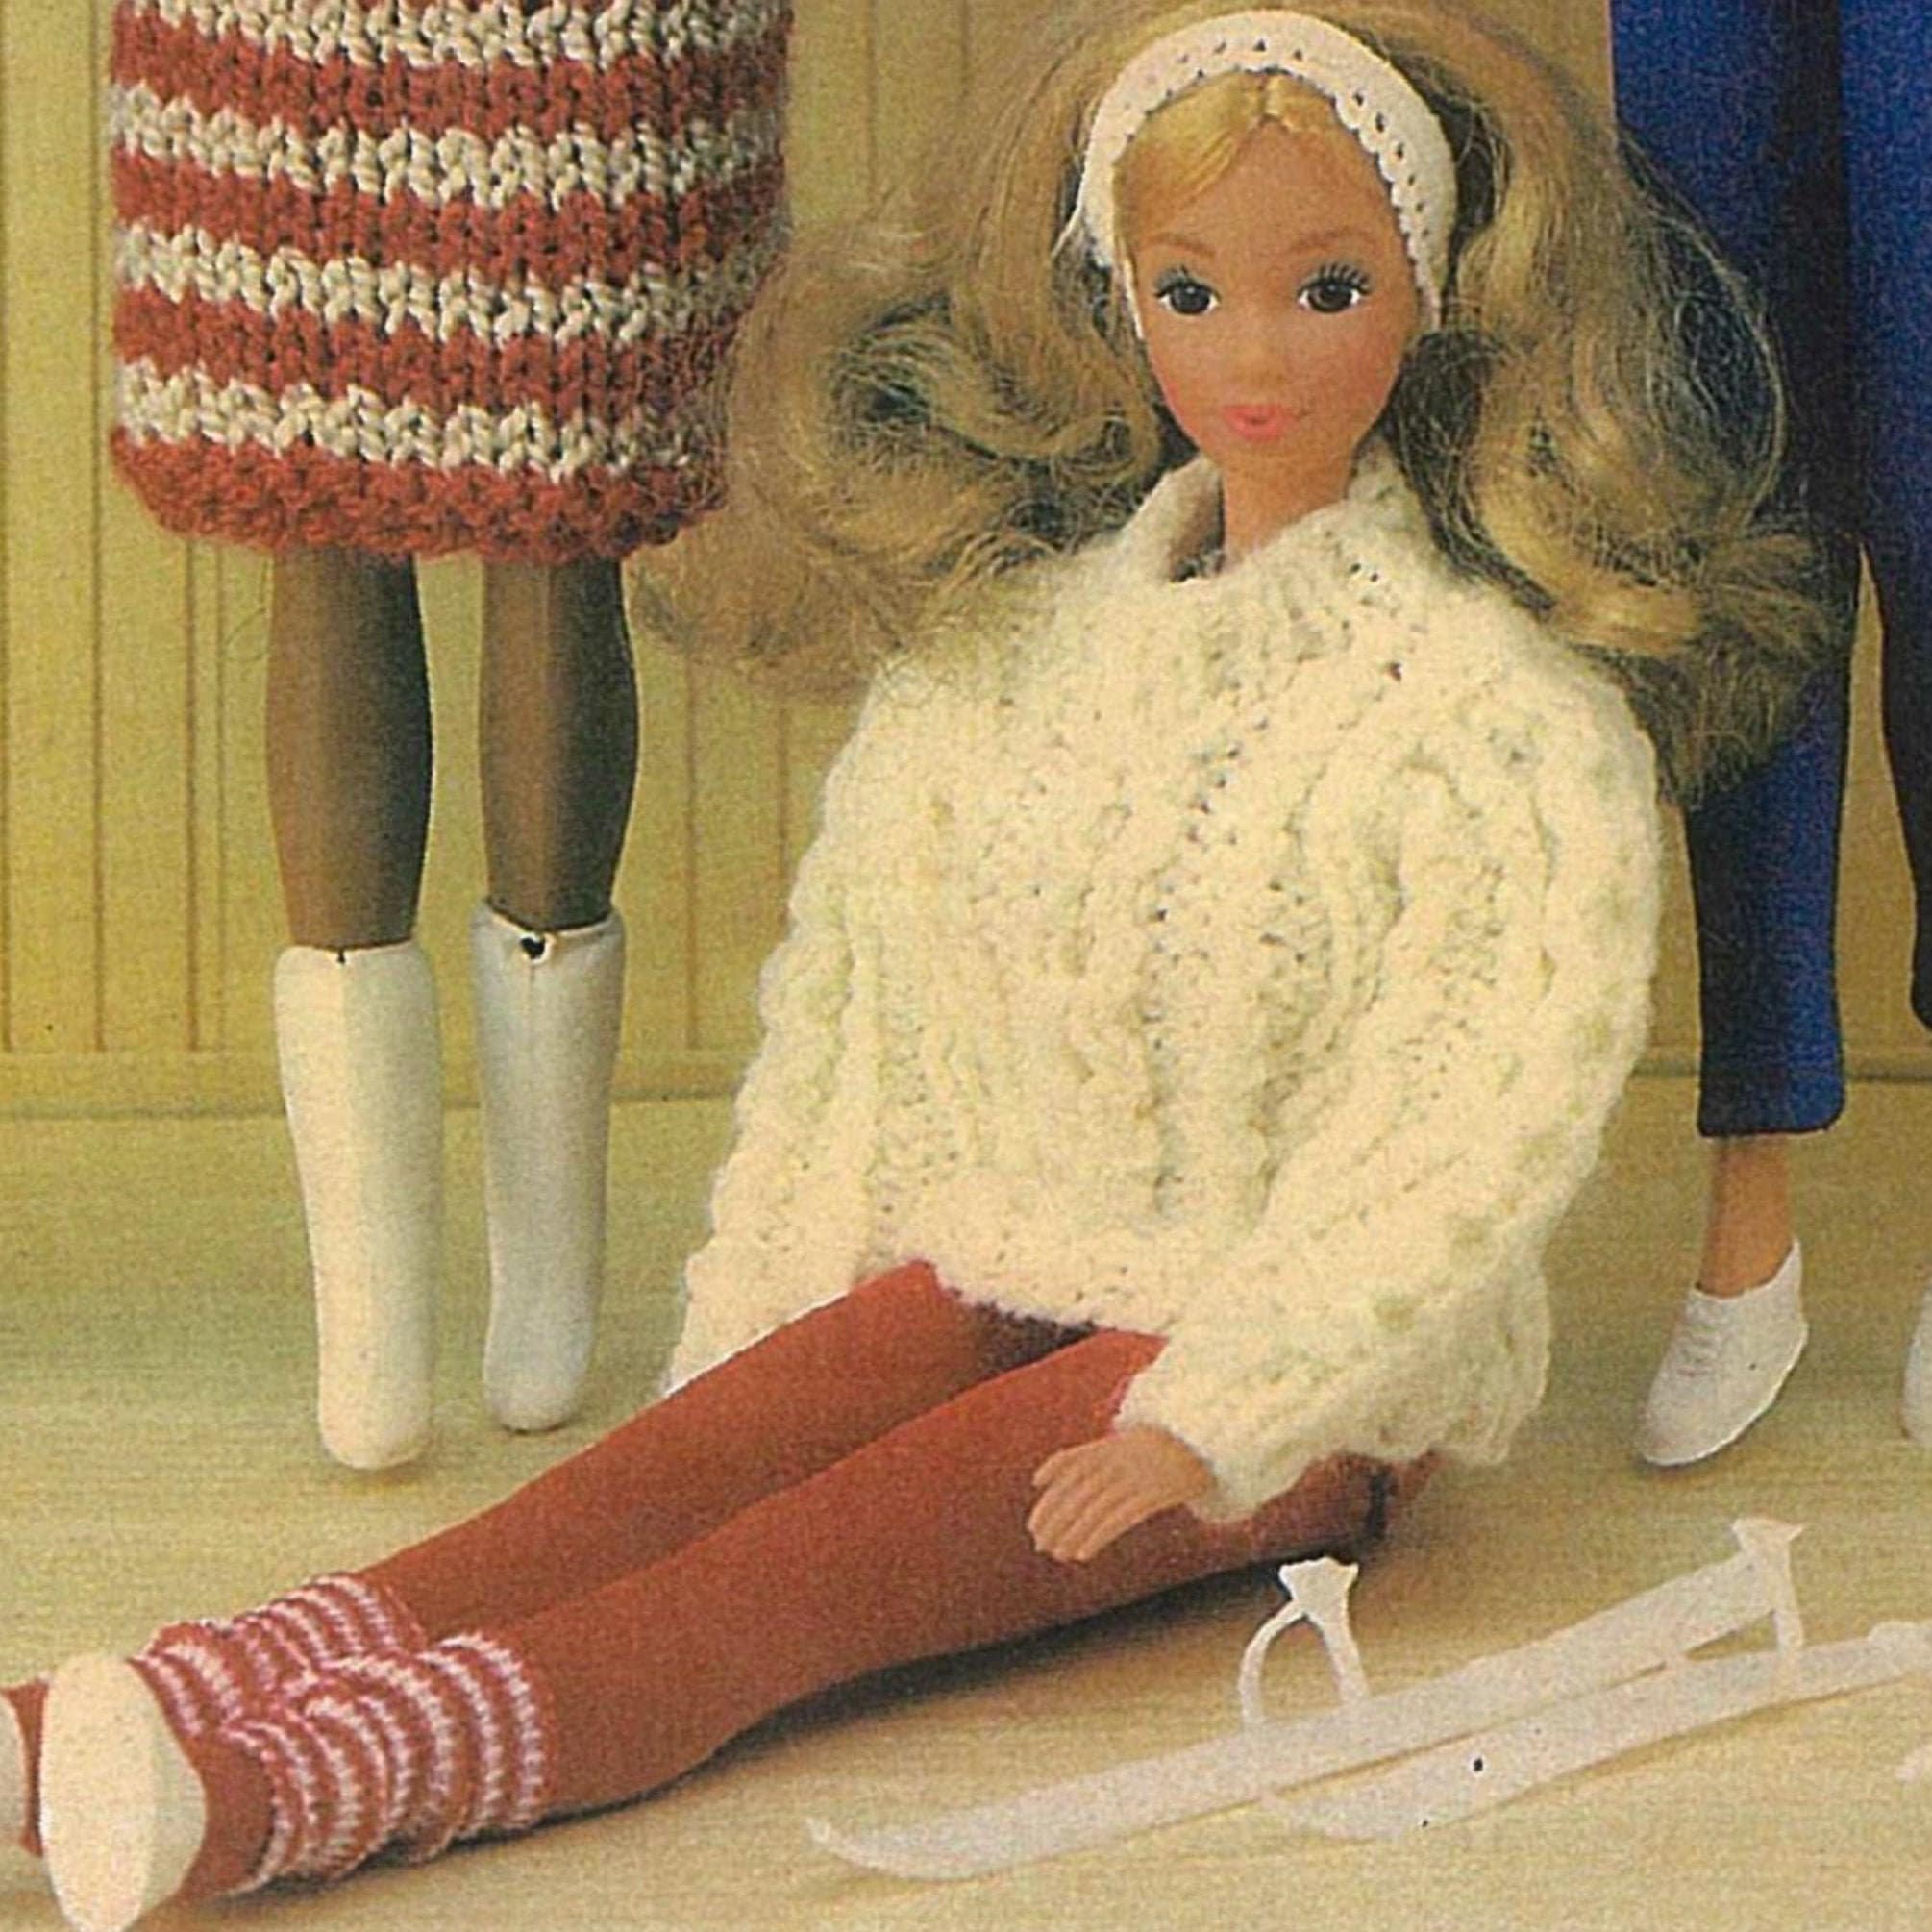 Barbie and Ken Doll Clothes Knitting Pattern Vintage Pattern PDF Instant  Download Printed on 8-1/2x11 A4 Paper 